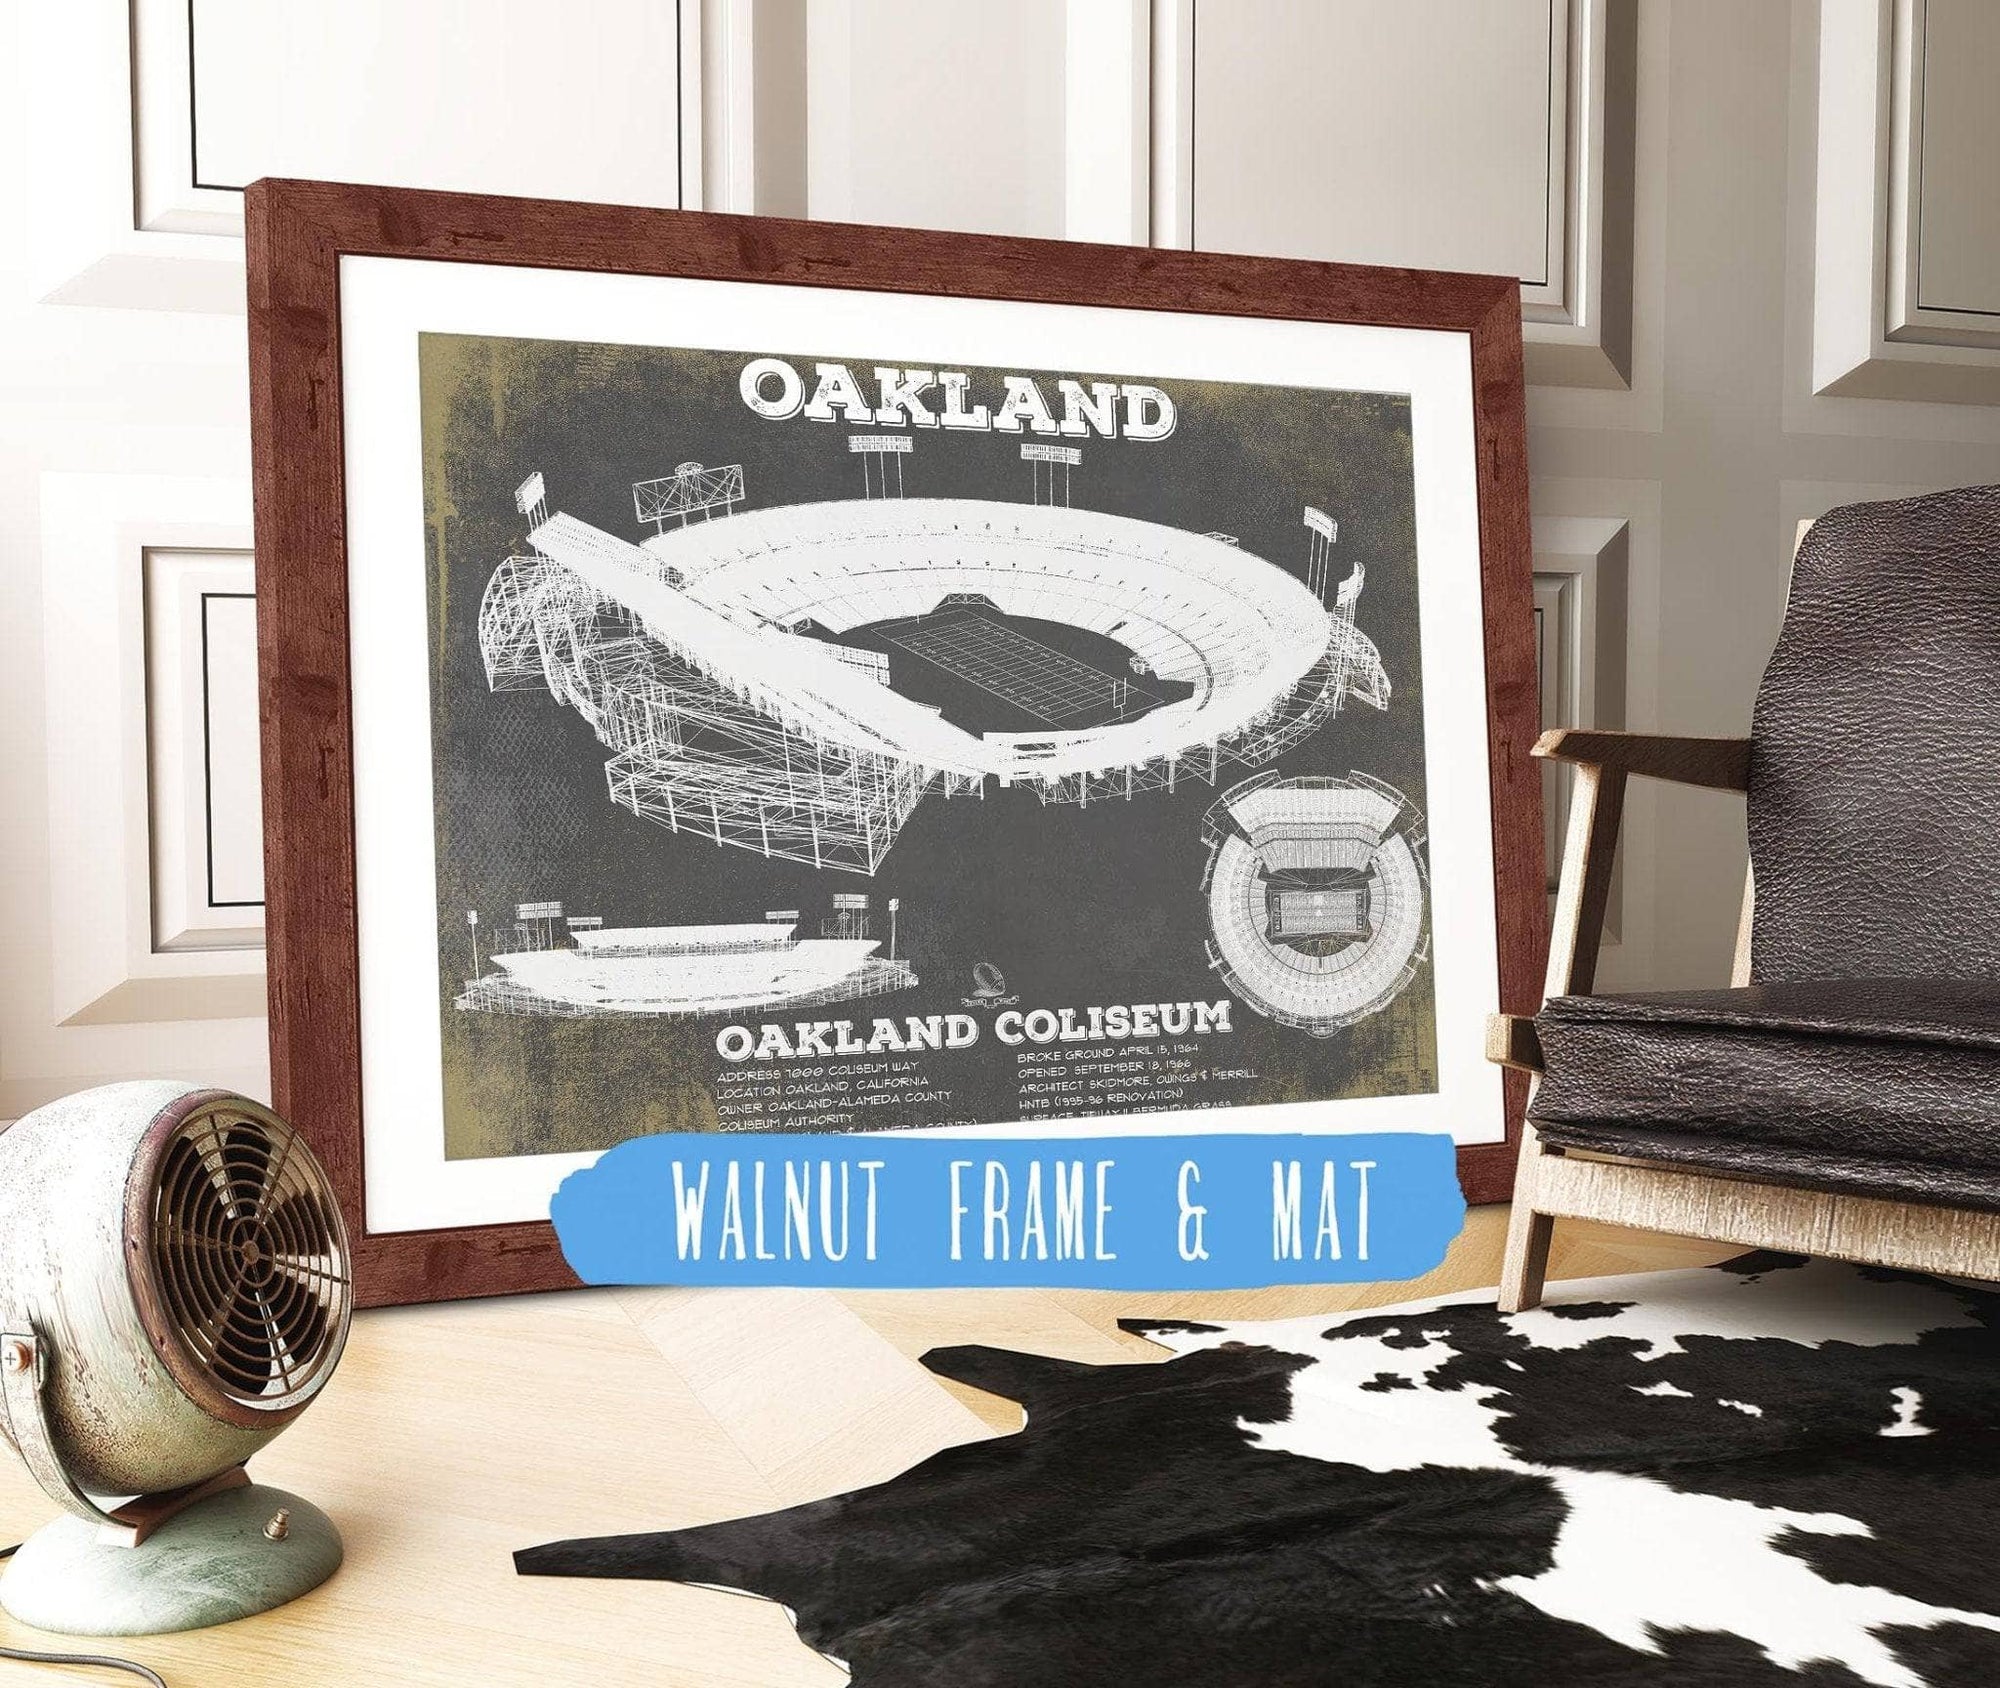 Cutler West Pro Football Collection 14" x 11" / Walnut Frame & Mat Oakland Raiders Team Color Alameda County Coliseum Seating Chart - Vintage Football Print 920787395-TOP_70365